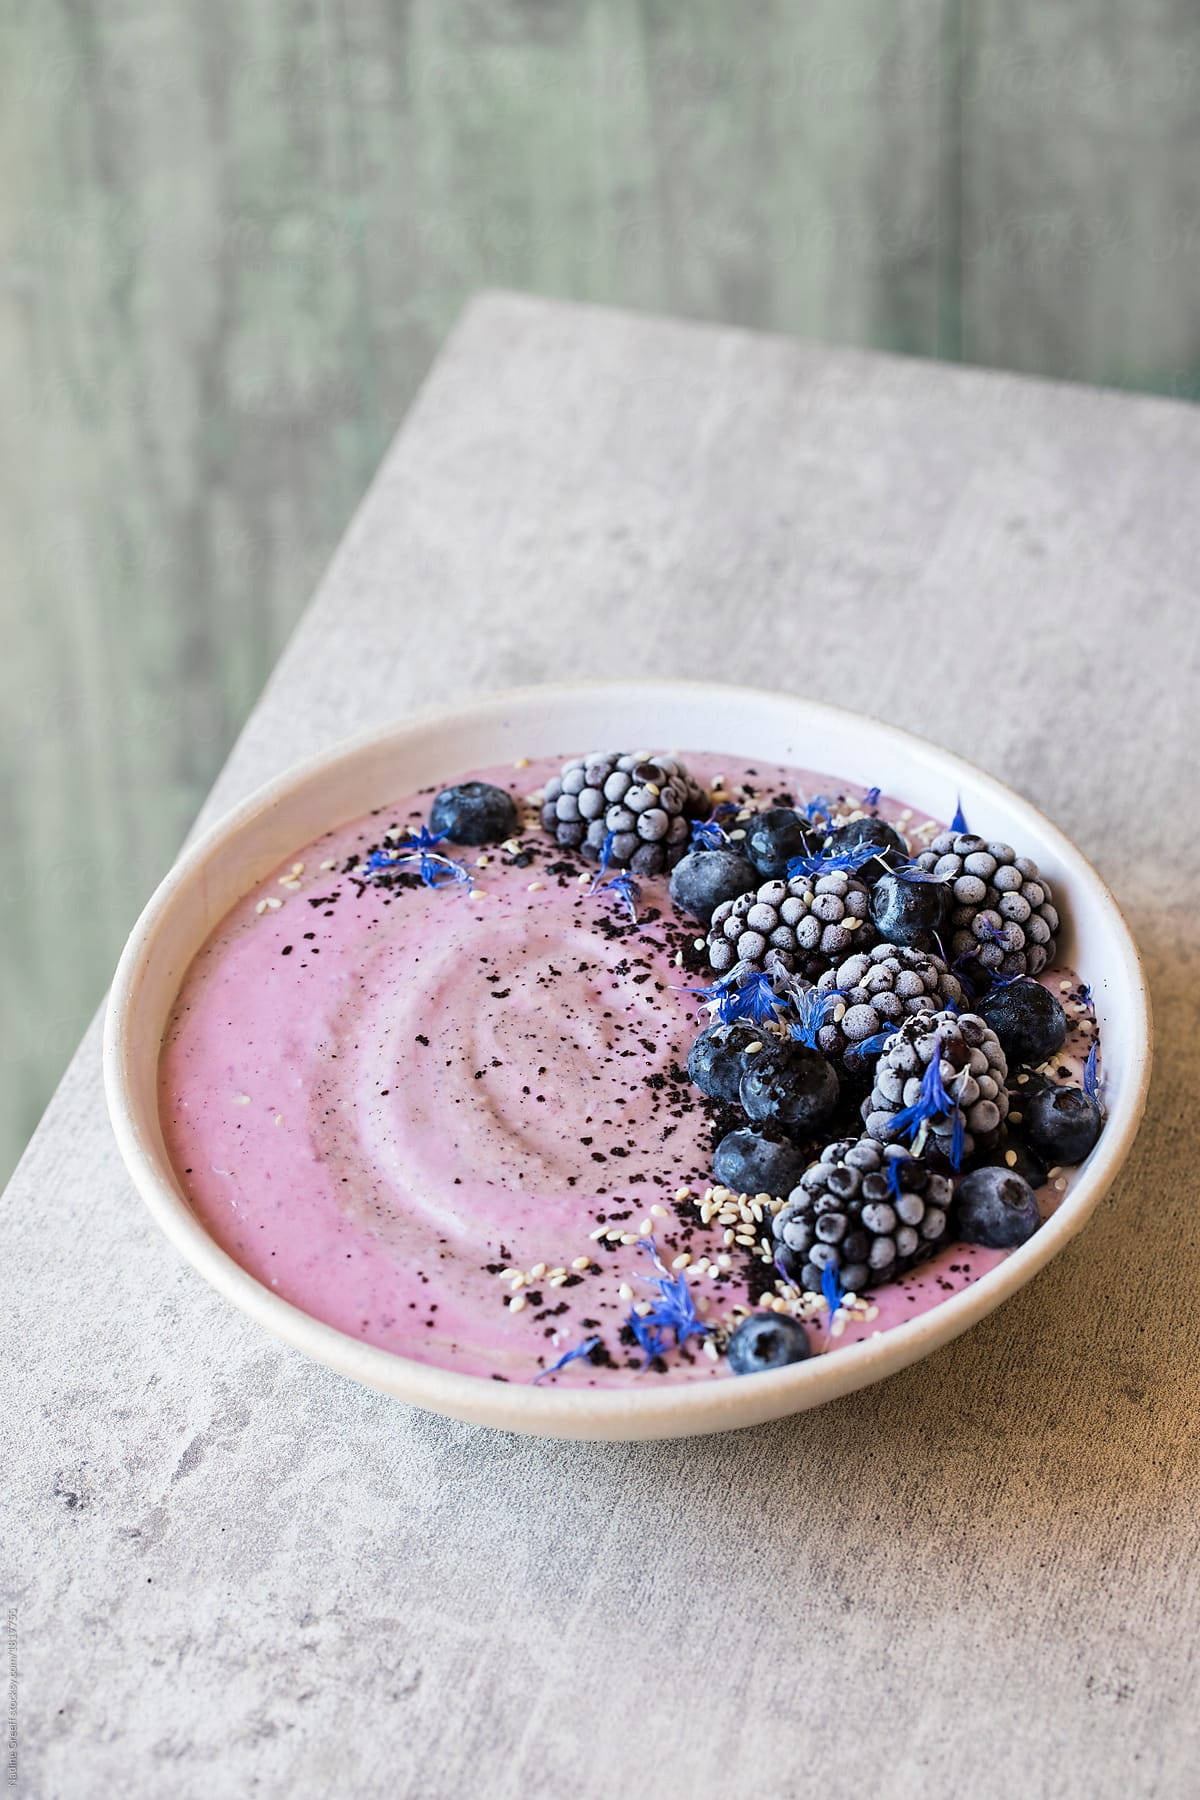 Acai Fruit Bowl With Blueberries Wallpaper